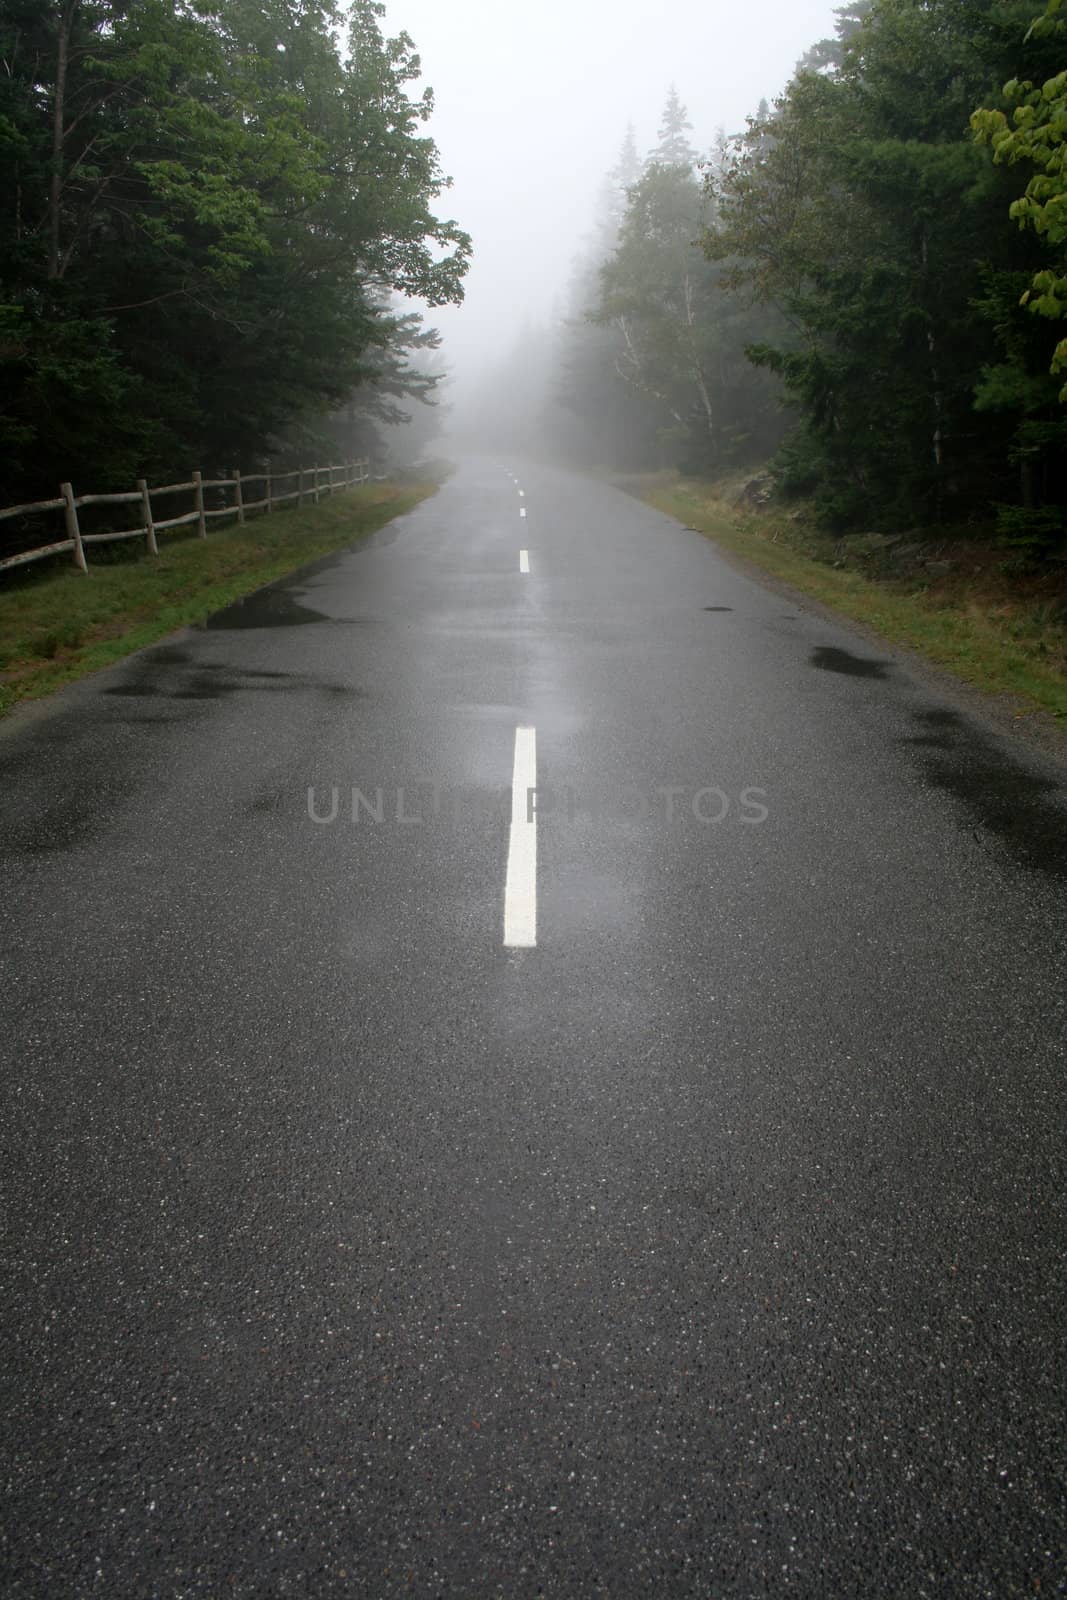 A road leading through a forest cast in fog.
